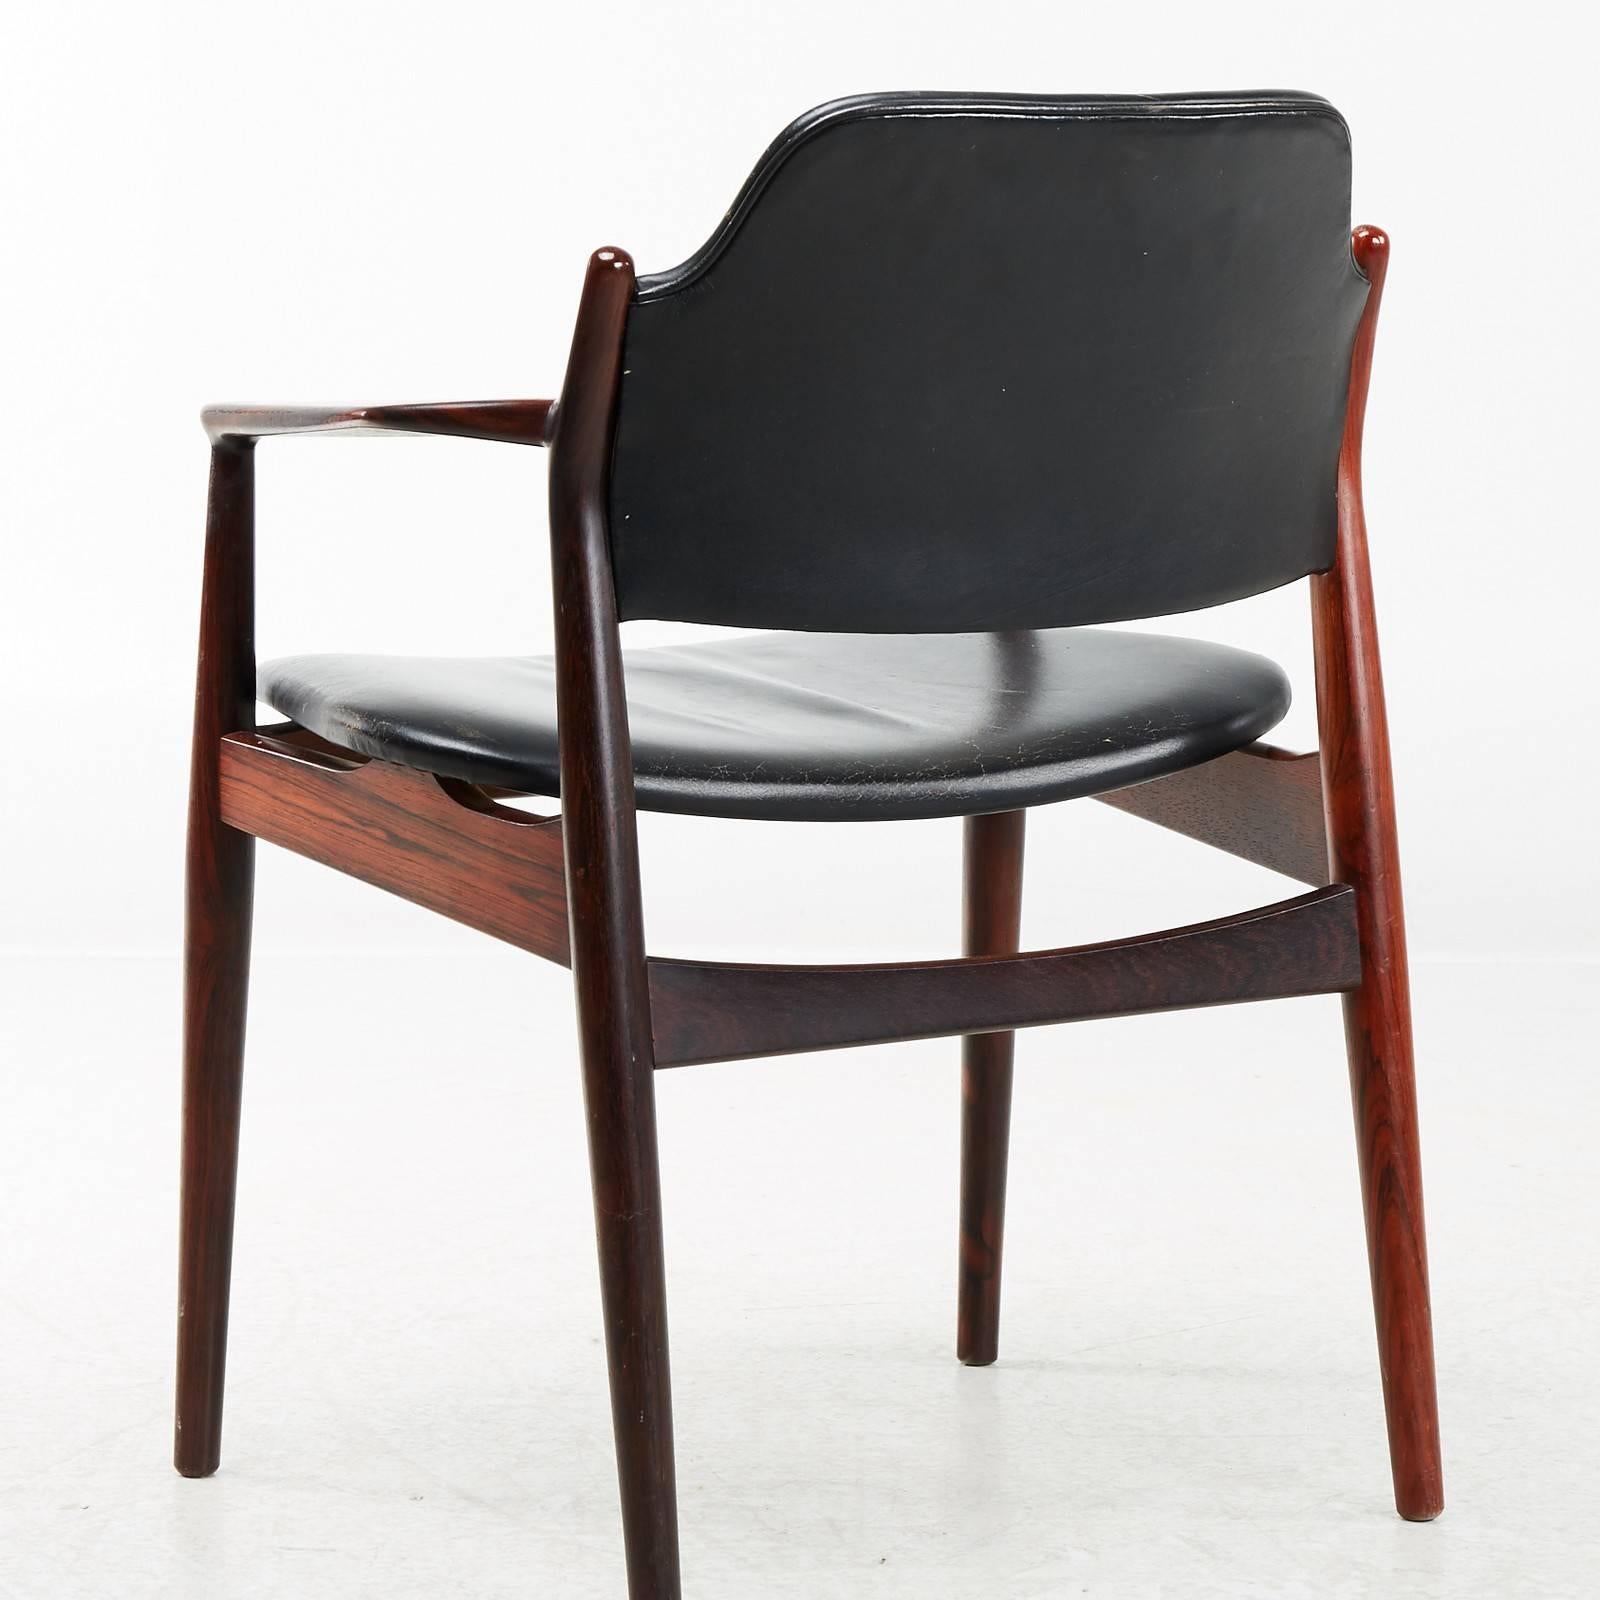 Scandinavian Modern 1960s Arne Vodder Model 62A Armchair in Rosewood and Black Leather, Sibast